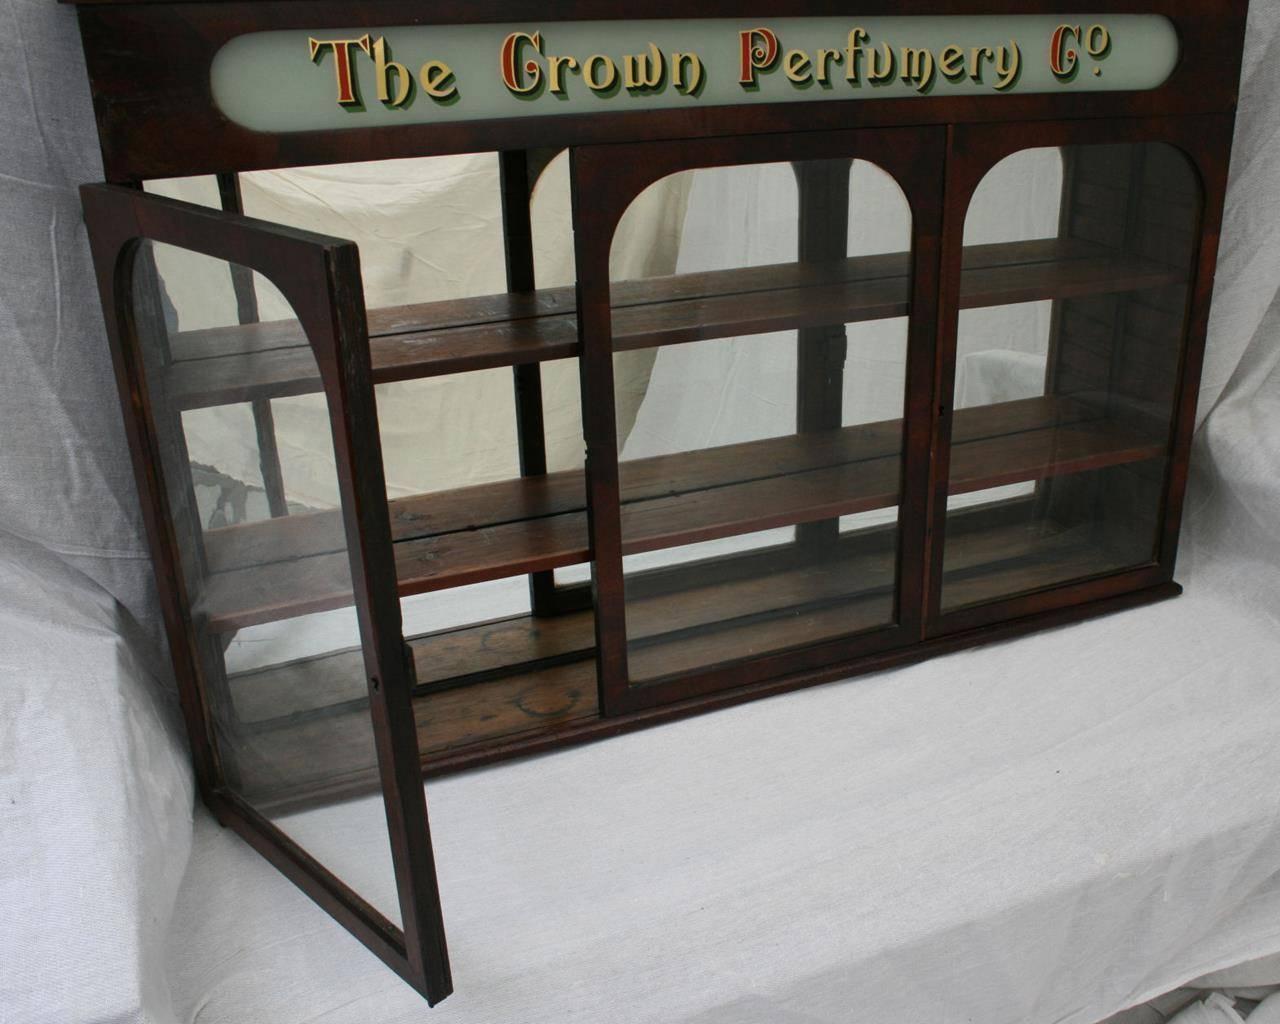 Victorian antique 19th century three-door pharmacy cabinet with a sliding door to the centre and two hinged doors left and right. Original antique wavy glass doors and original glass advertising pediment advertising The Crown Perfumery Co. This